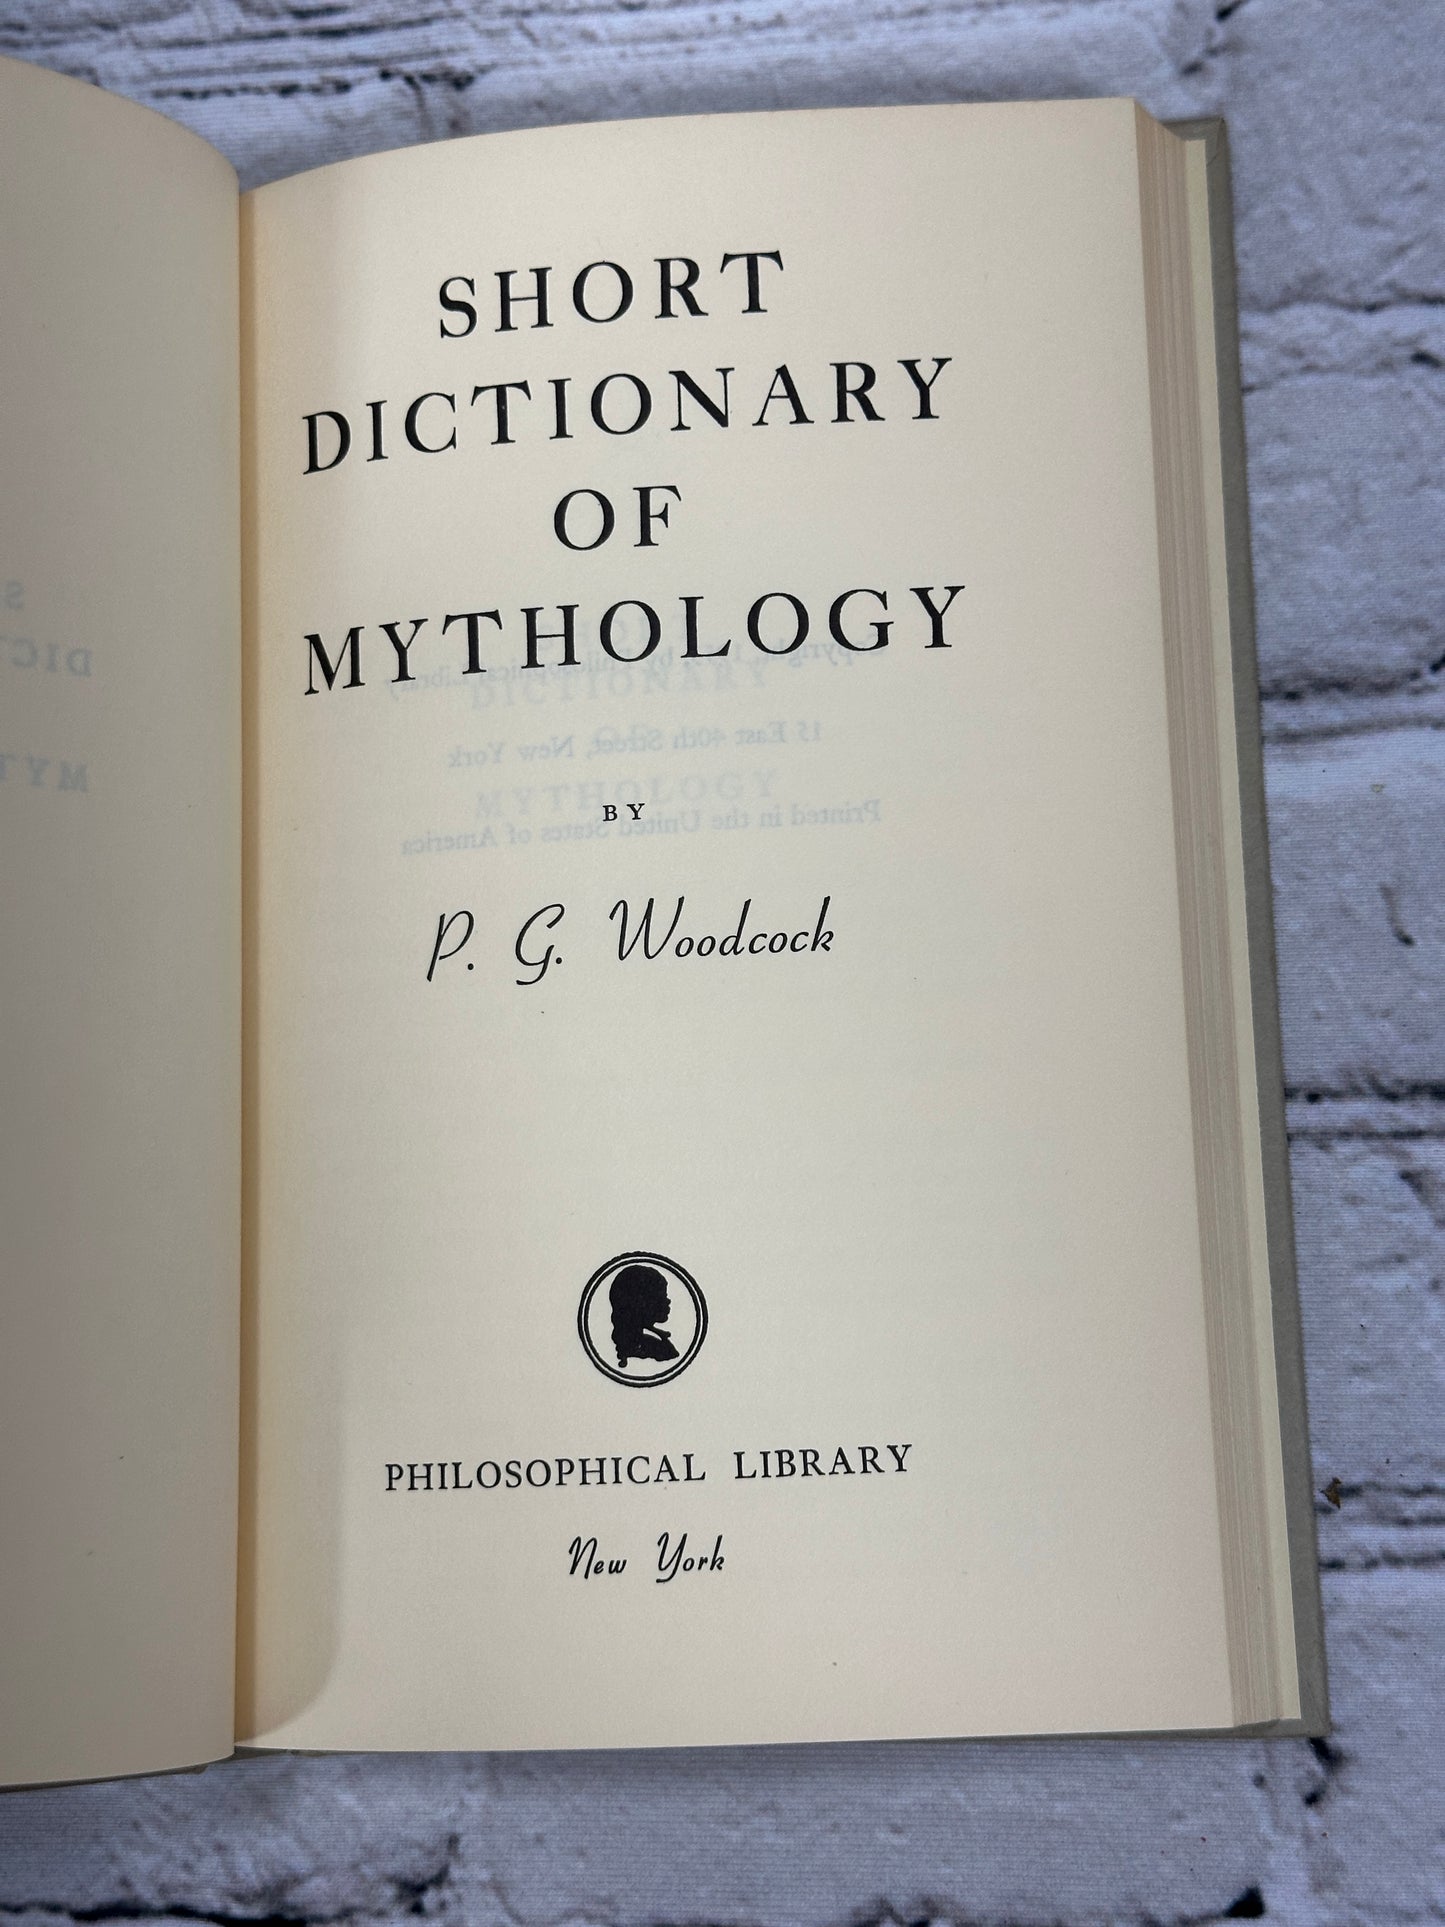 Short Dictionary of Mythology by Percival George Woodcock [1953]